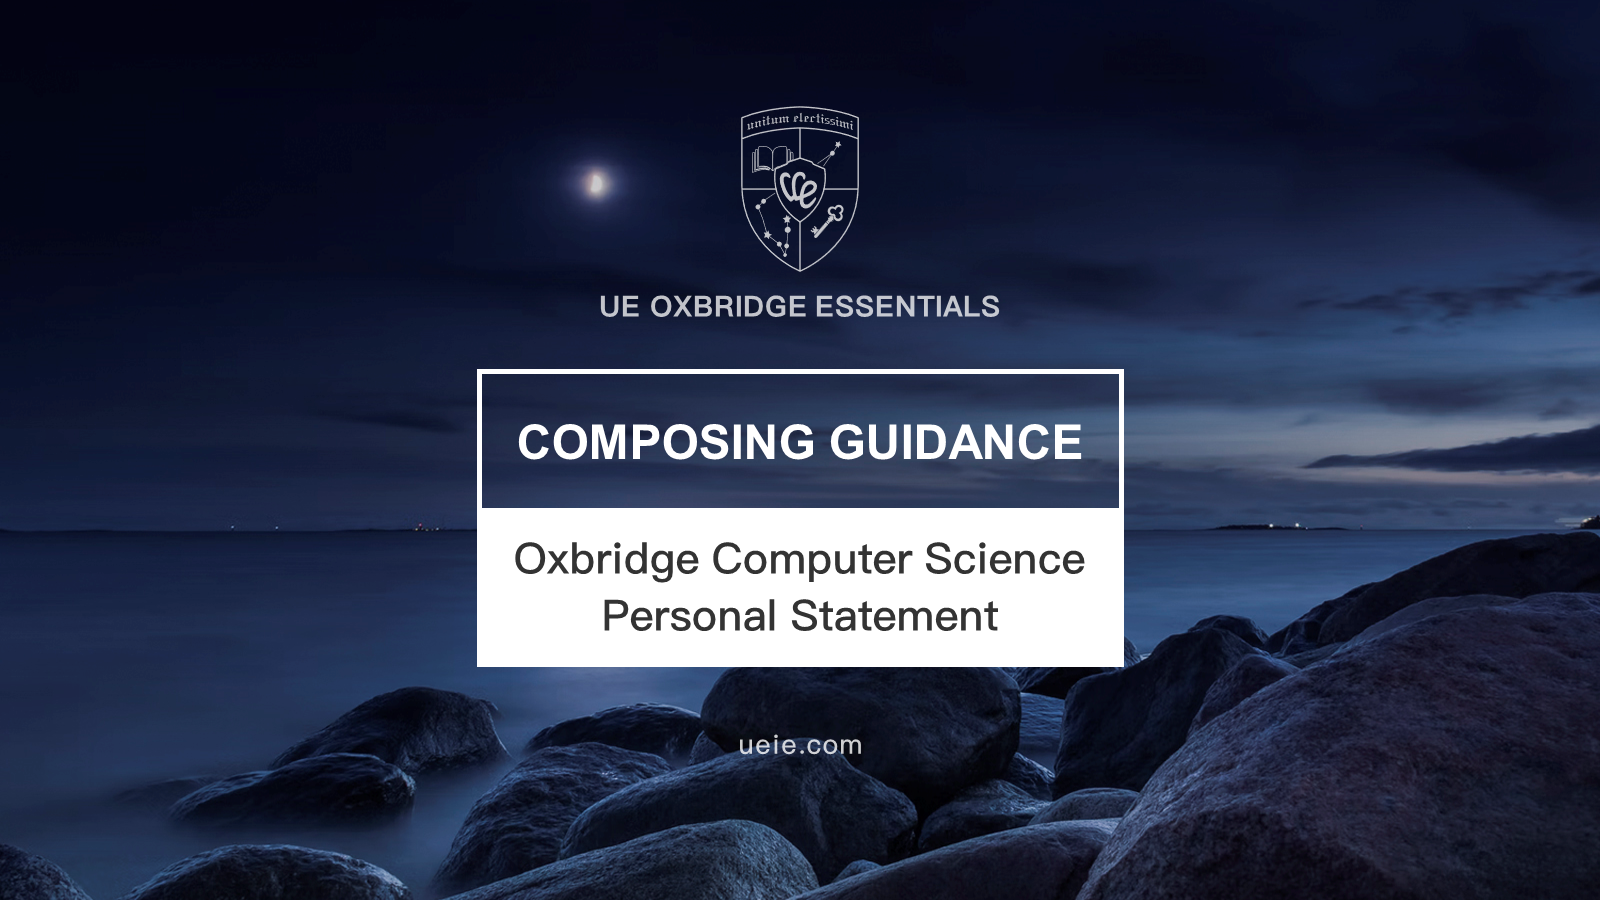 Oxbridge Computer Science Personal Statement: Composing Guidance